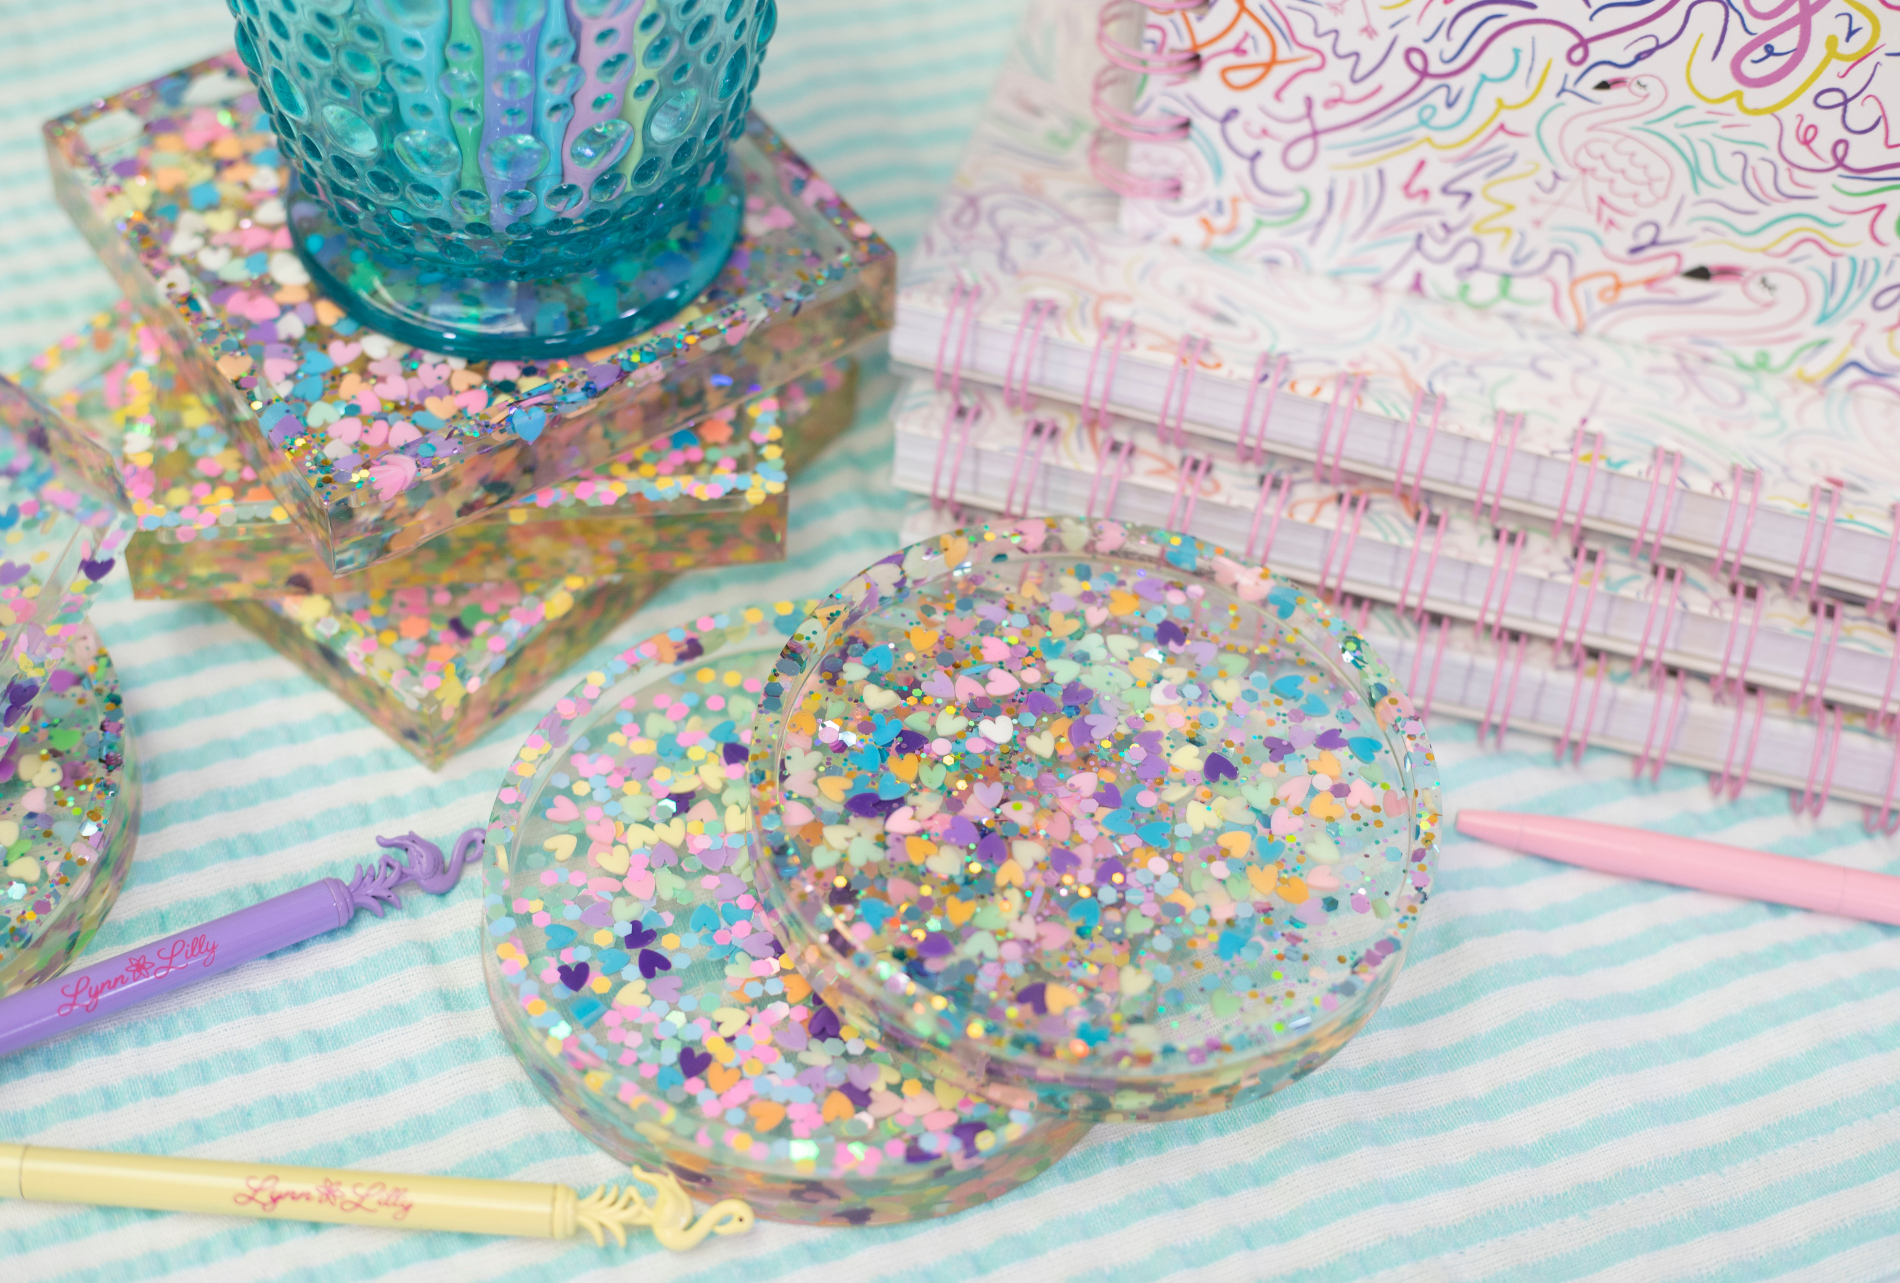 Glitter - Handcrafted Resin Art Coasters